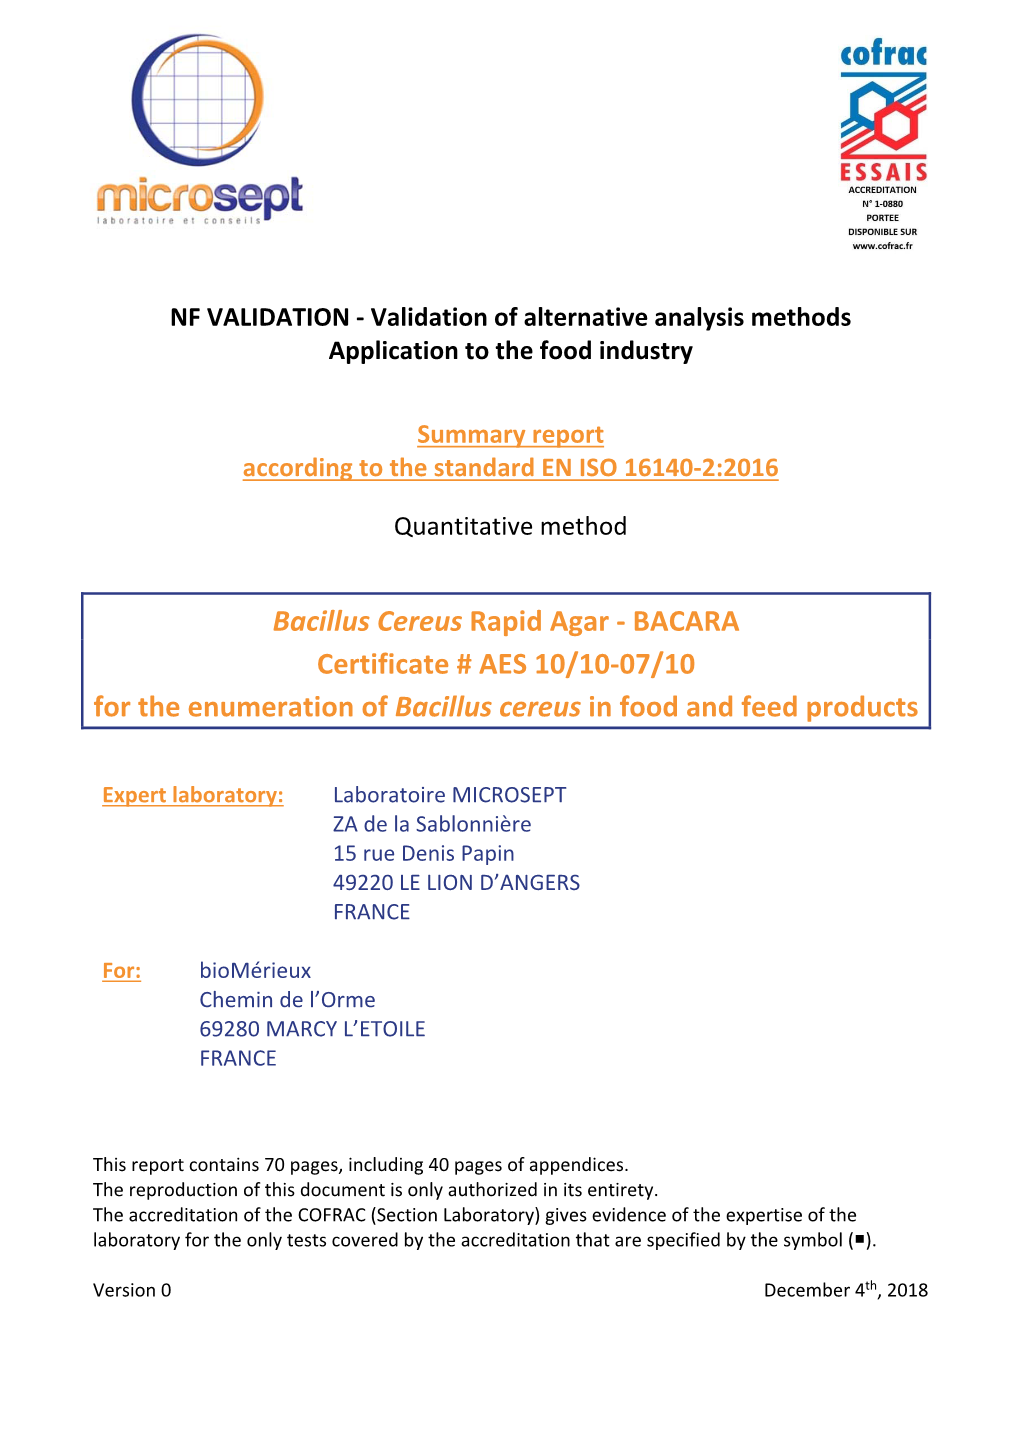 Bacillus Cereus Rapid Agar ‐ BACARA Certificate # AES 10/10‐07/10 for the Enumeration of Bacillus Cereus in Food and Feed Products